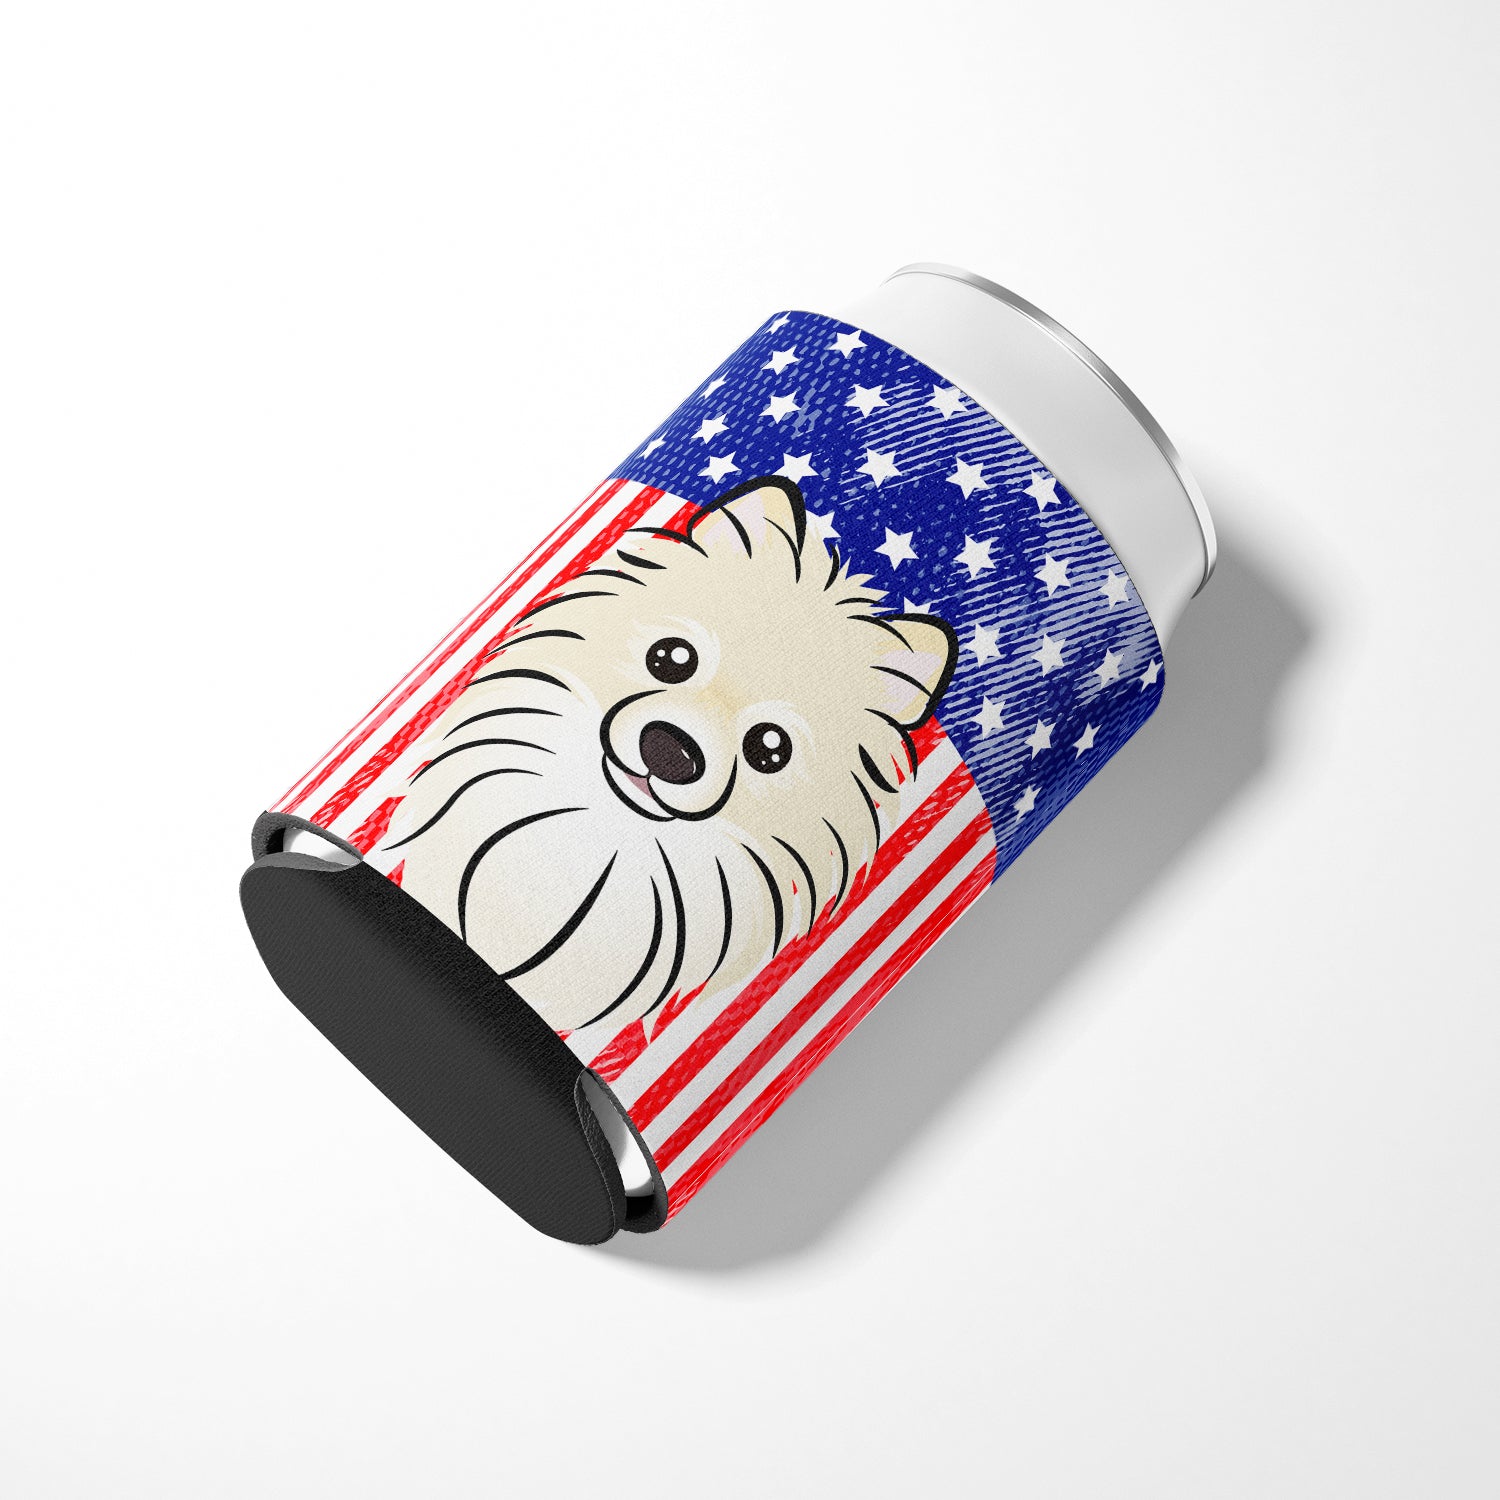 American Flag and Pomeranian Can or Bottle Hugger BB2137CC.